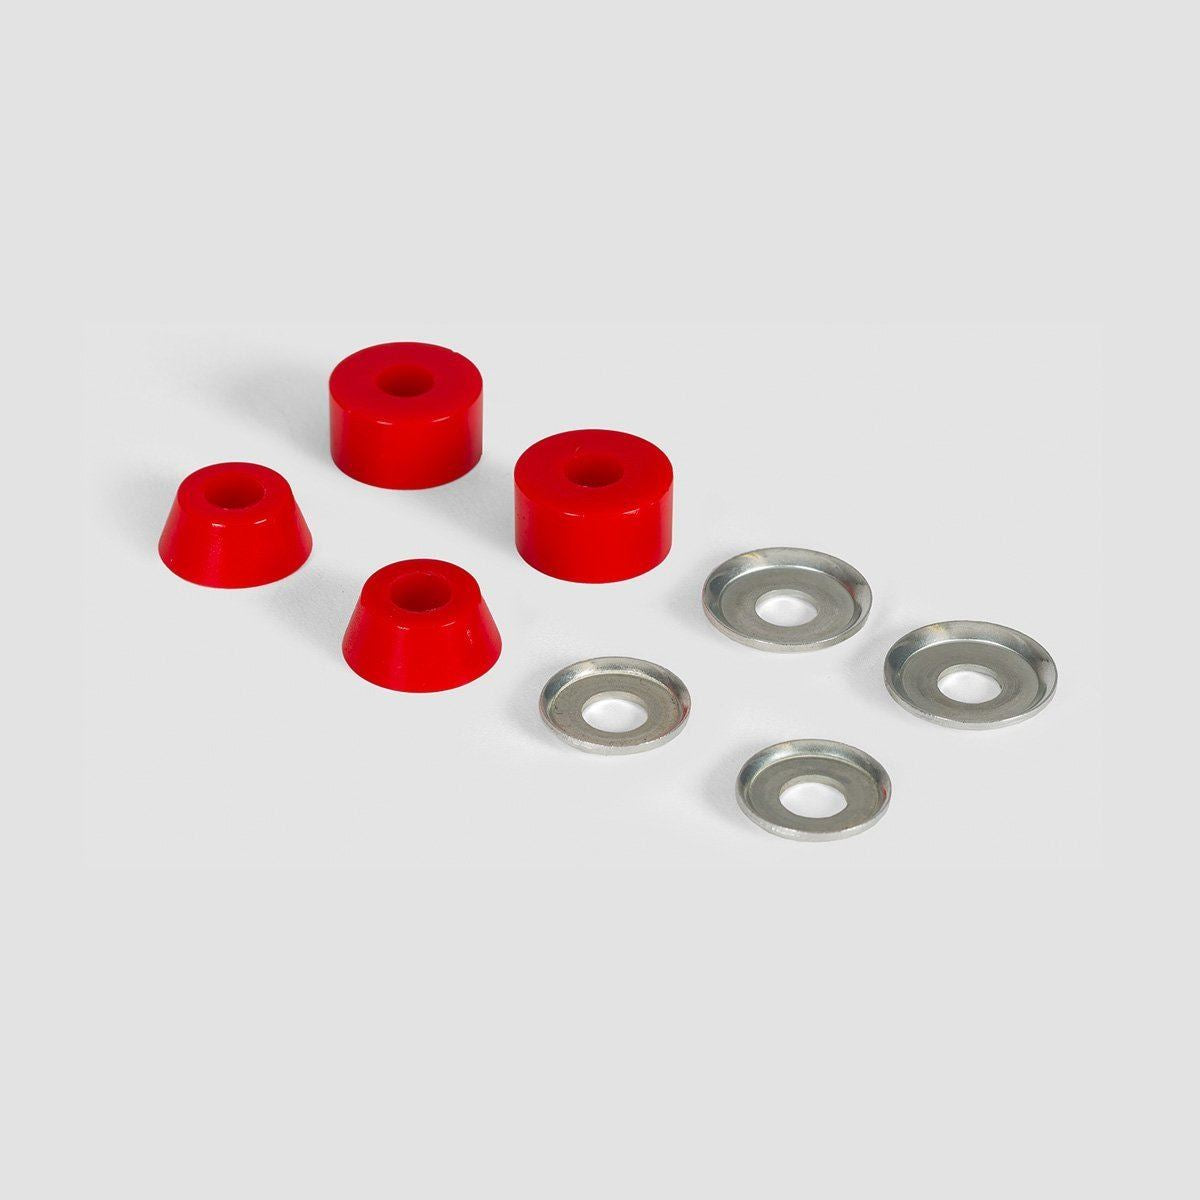 Independent Standard Cylinder Soft 88a Bushings Red